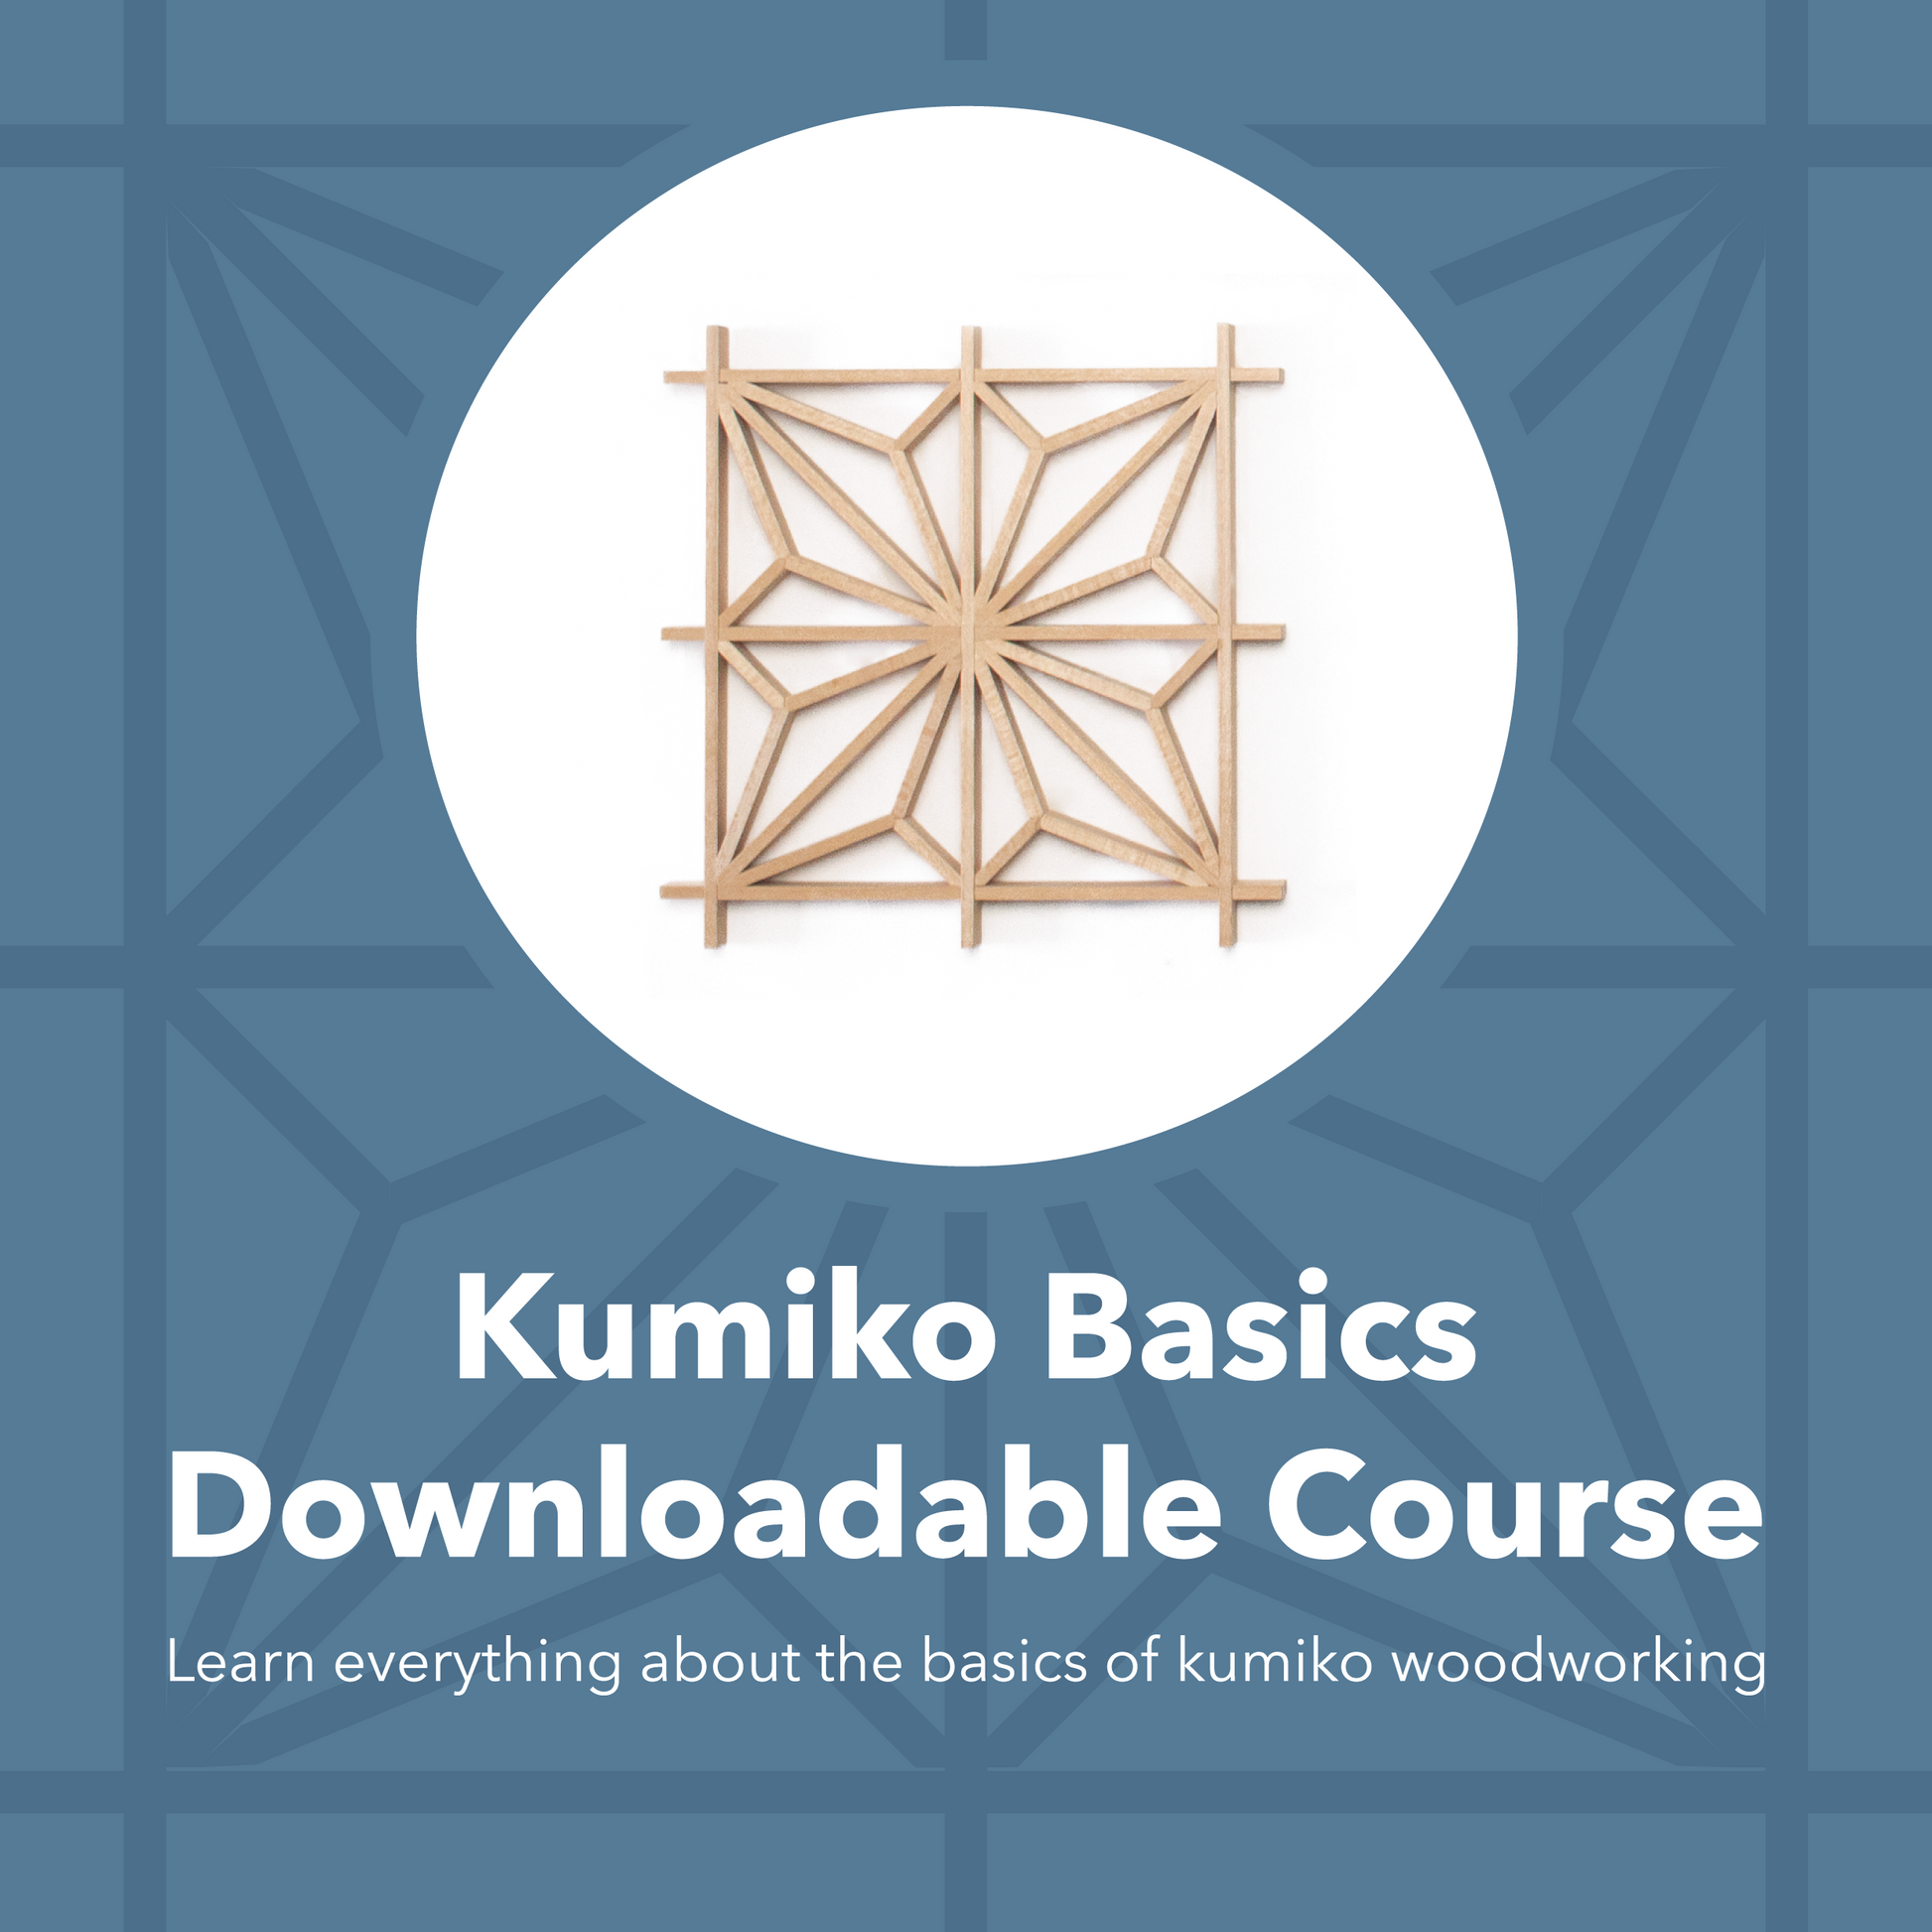 Graphic image of the "Kumiko Basics Downloadable Course". Features a photo of asanoha kumiko grid and text that reads "Learn everything about the basics of kumiko woodworking".